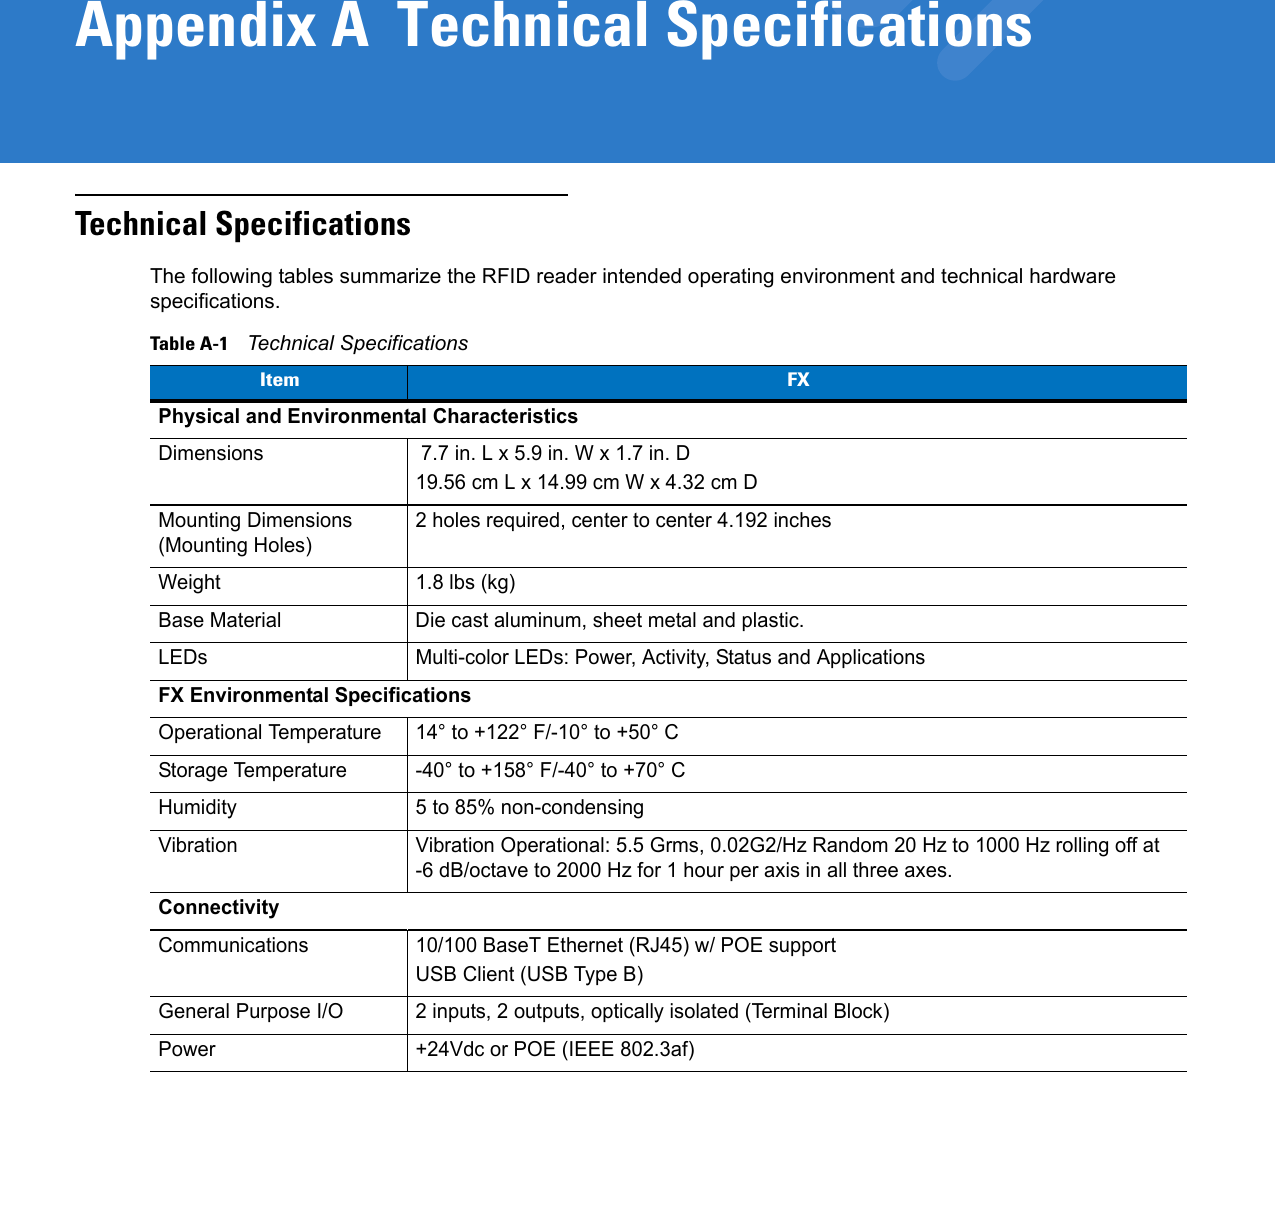 Appendix A  Technical SpecificationsTechnical SpecificationsThe following tables summarize the RFID reader intended operating environment and technical hardware specifications.Table A-1    Technical SpecificationsItem FXPhysical and Environmental CharacteristicsDimensions   7.7 in. L x 5.9 in. W x 1.7 in. D19.56 cm L x 14.99 cm W x 4.32 cm DMounting Dimensions (Mounting Holes)2 holes required, center to center 4.192 inchesWeight  1.8 lbs (kg)Base Material Die cast aluminum, sheet metal and plastic.LEDs Multi-color LEDs: Power, Activity, Status and ApplicationsFX Environmental SpecificationsOperational Temperature 14° to +122° F/-10° to +50° CStorage Temperature -40° to +158° F/-40° to +70° CHumidity 5 to 85% non-condensingVibration Vibration Operational: 5.5 Grms, 0.02G2/Hz Random 20 Hz to 1000 Hz rolling off at -6 dB/octave to 2000 Hz for 1 hour per axis in all three axes.ConnectivityCommunications 10/100 BaseT Ethernet (RJ45) w/ POE supportUSB Client (USB Type B)General Purpose I/O 2 inputs, 2 outputs, optically isolated (Terminal Block)Power +24Vdc or POE (IEEE 802.3af)